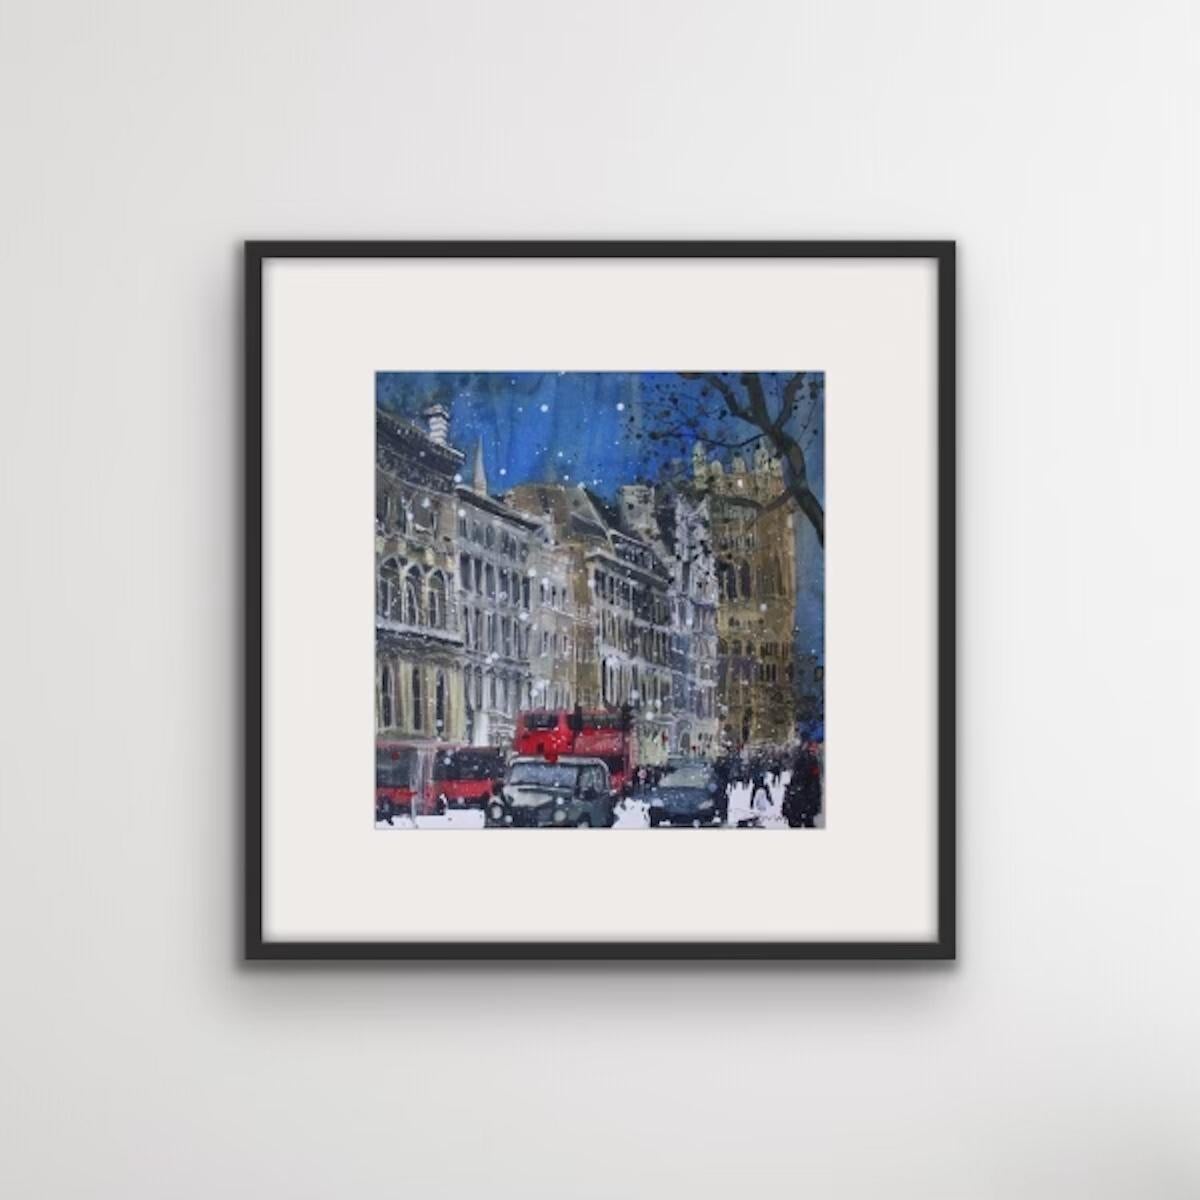 Winter Day Parliament by Susan Brown, Impressionist style art , London art - Contemporary Print by Susan Brown 